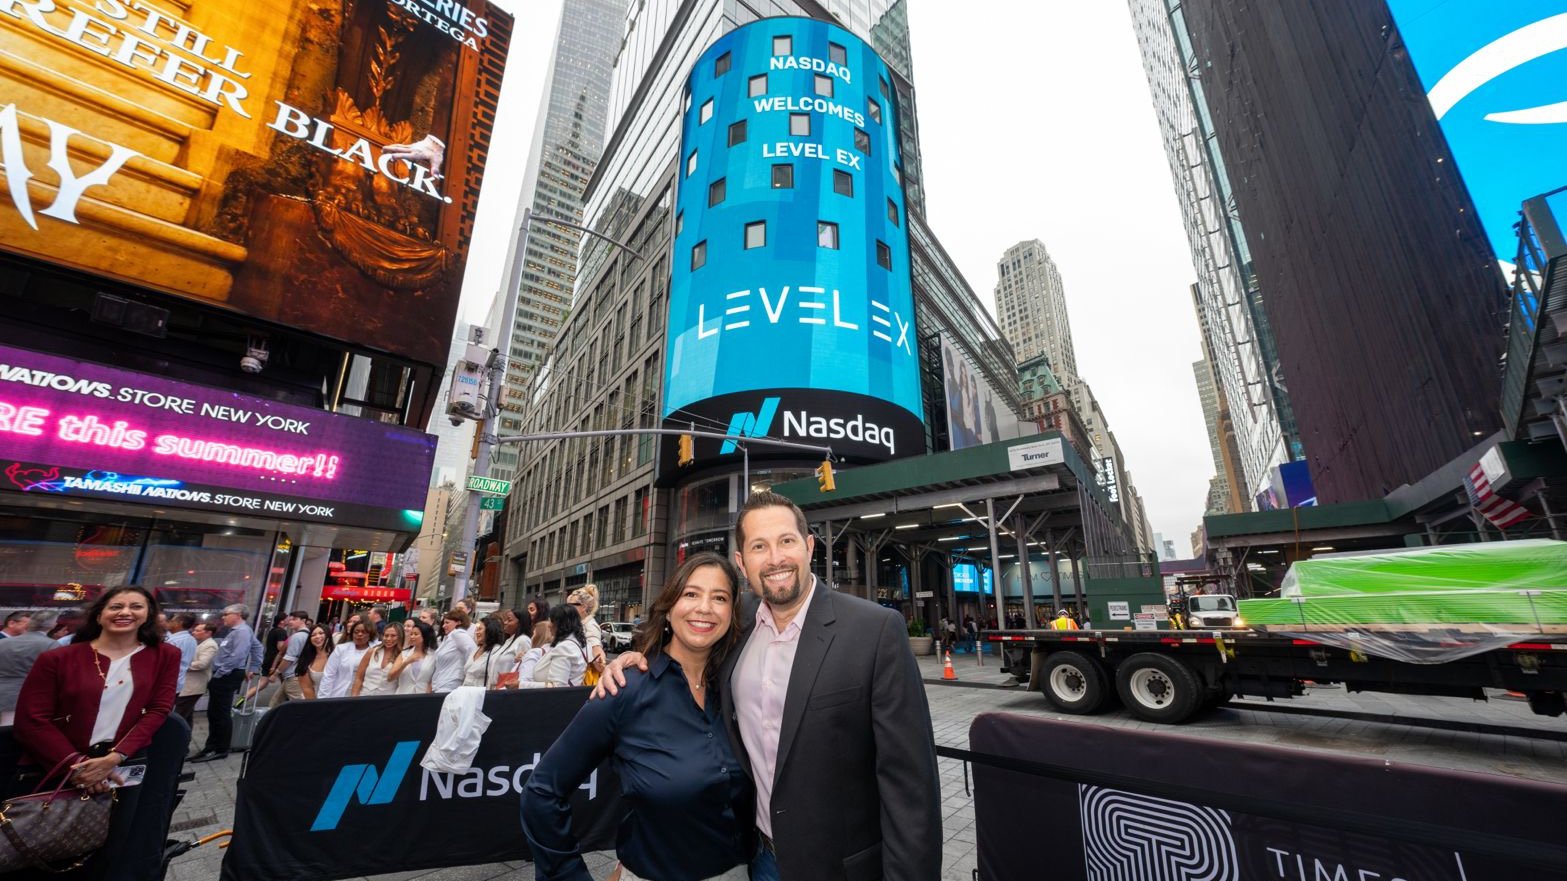  Level Ex’ Sam Glassenberg and Sandra Smith after an event on the floor of the Nasdaq.